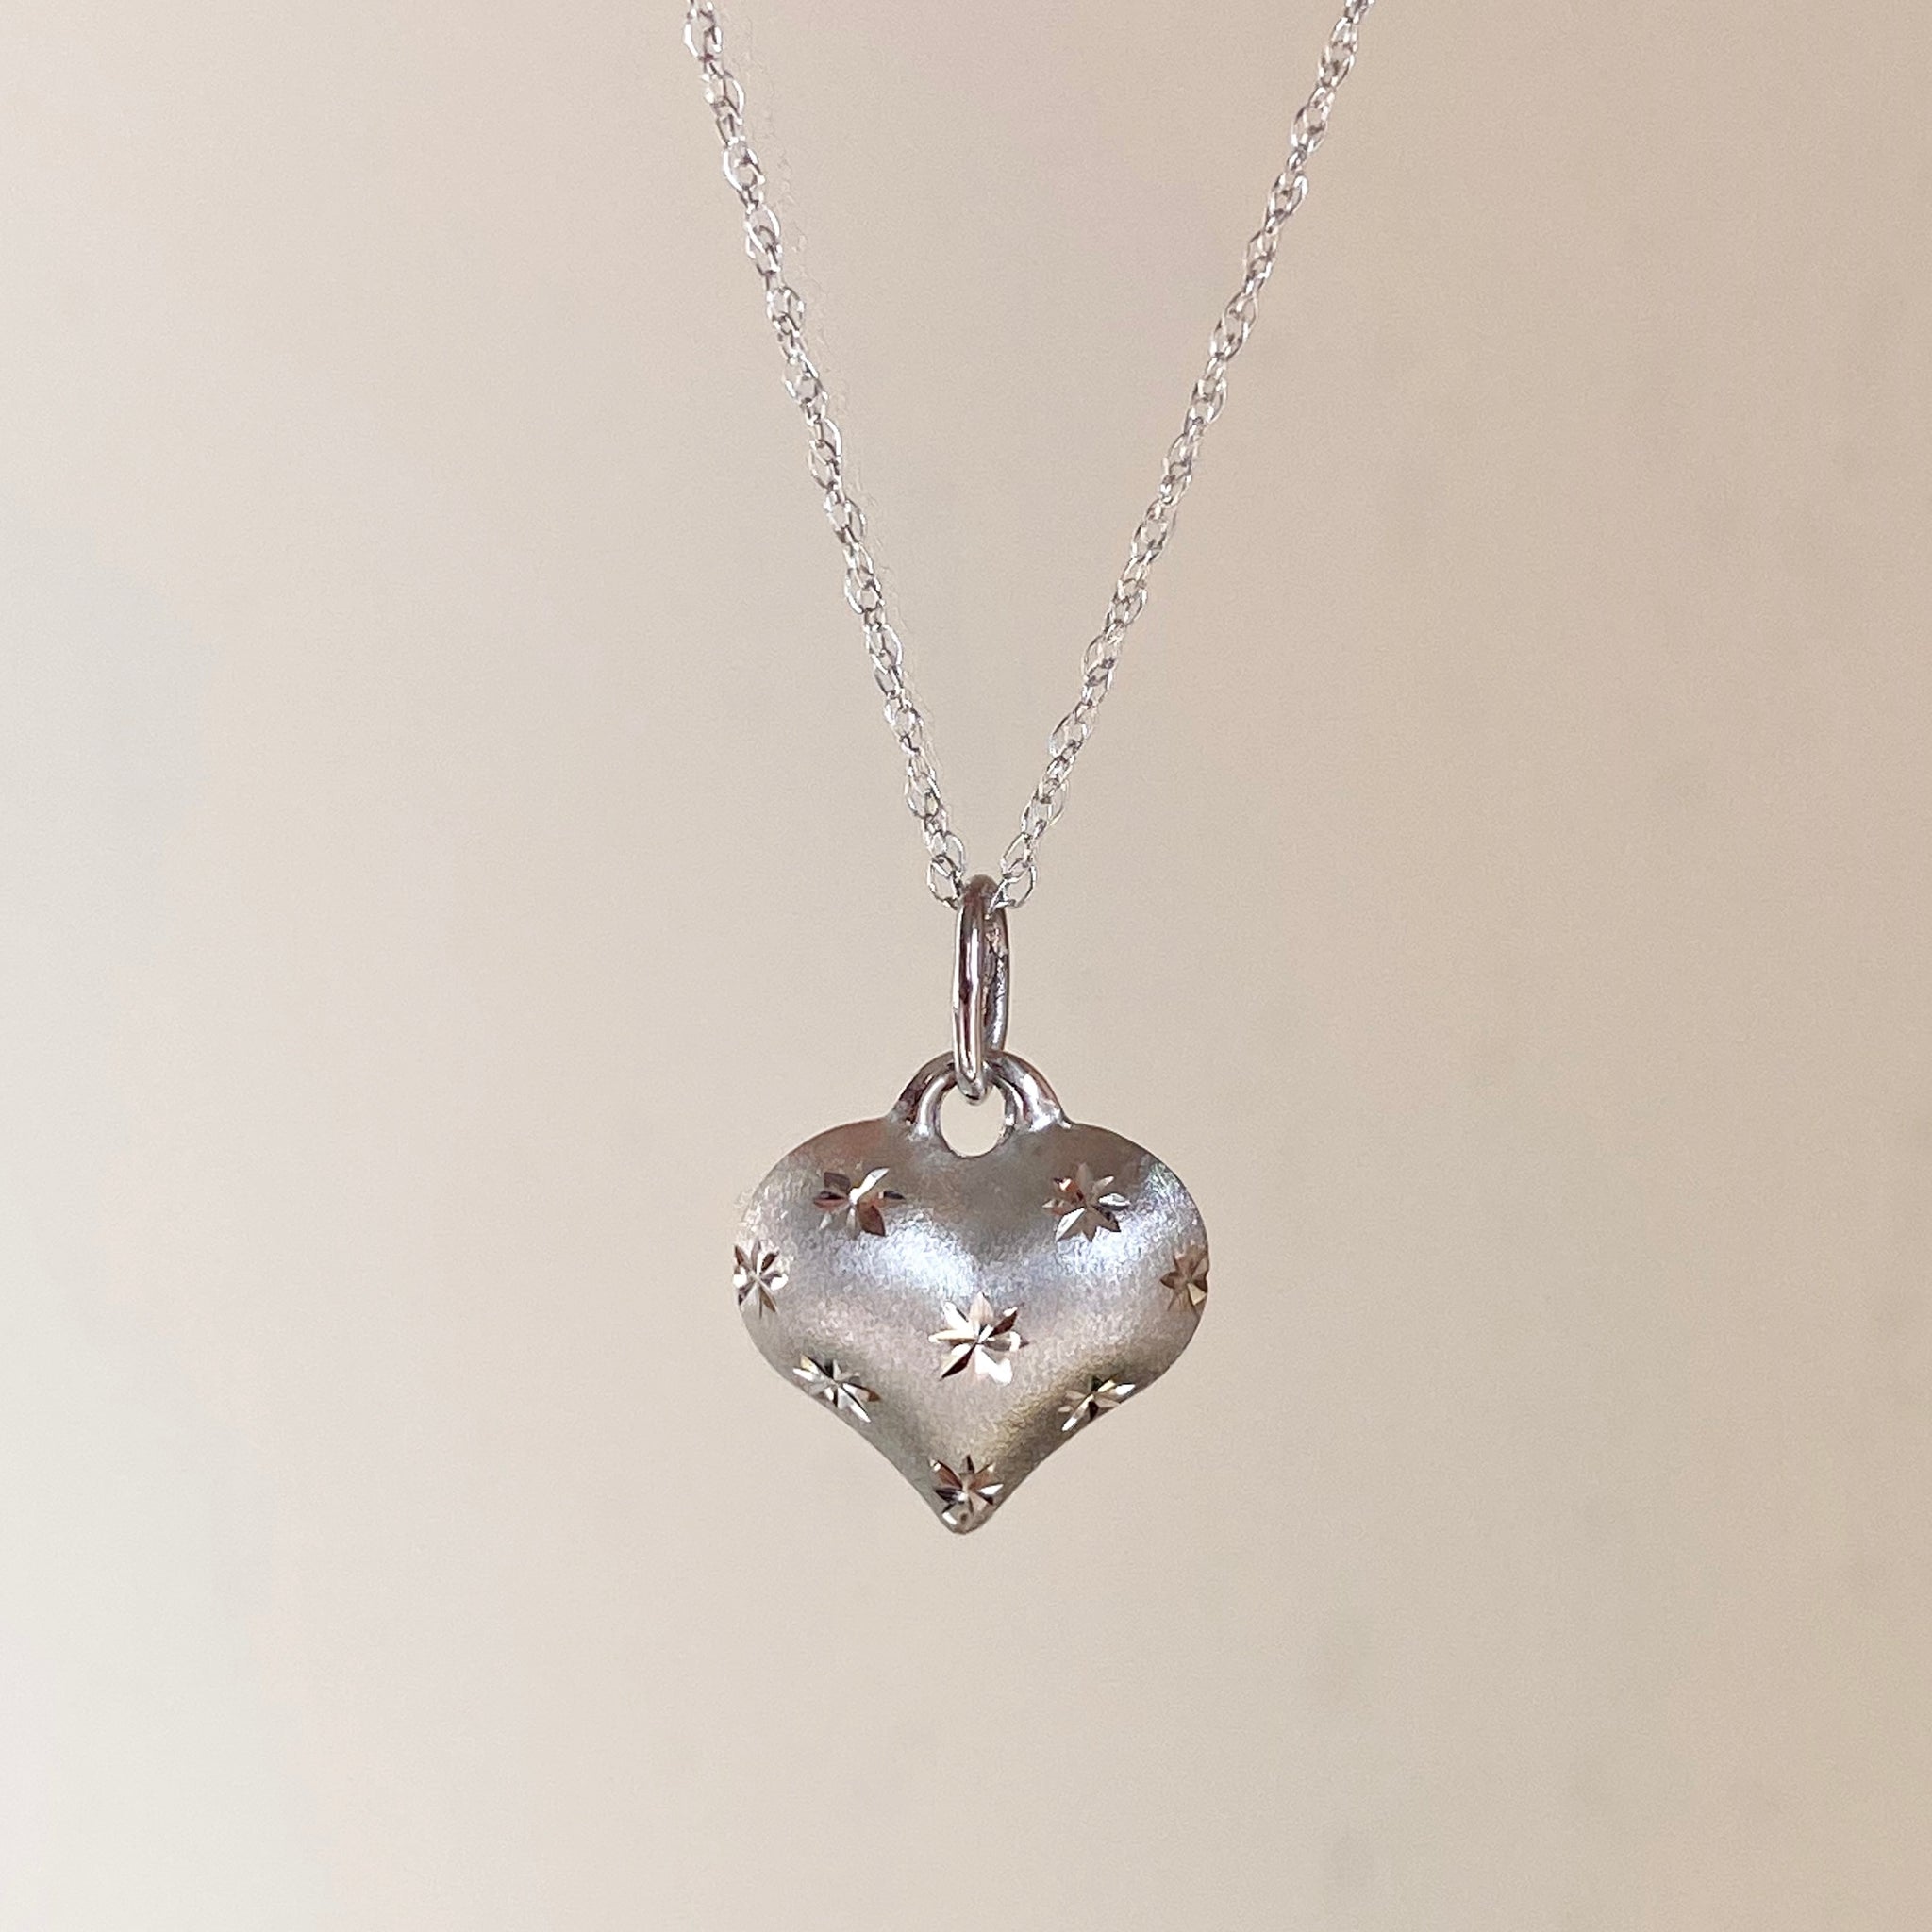 14k Gold 3D Heart Necklacebig Size Puffy Heart Pendant With 